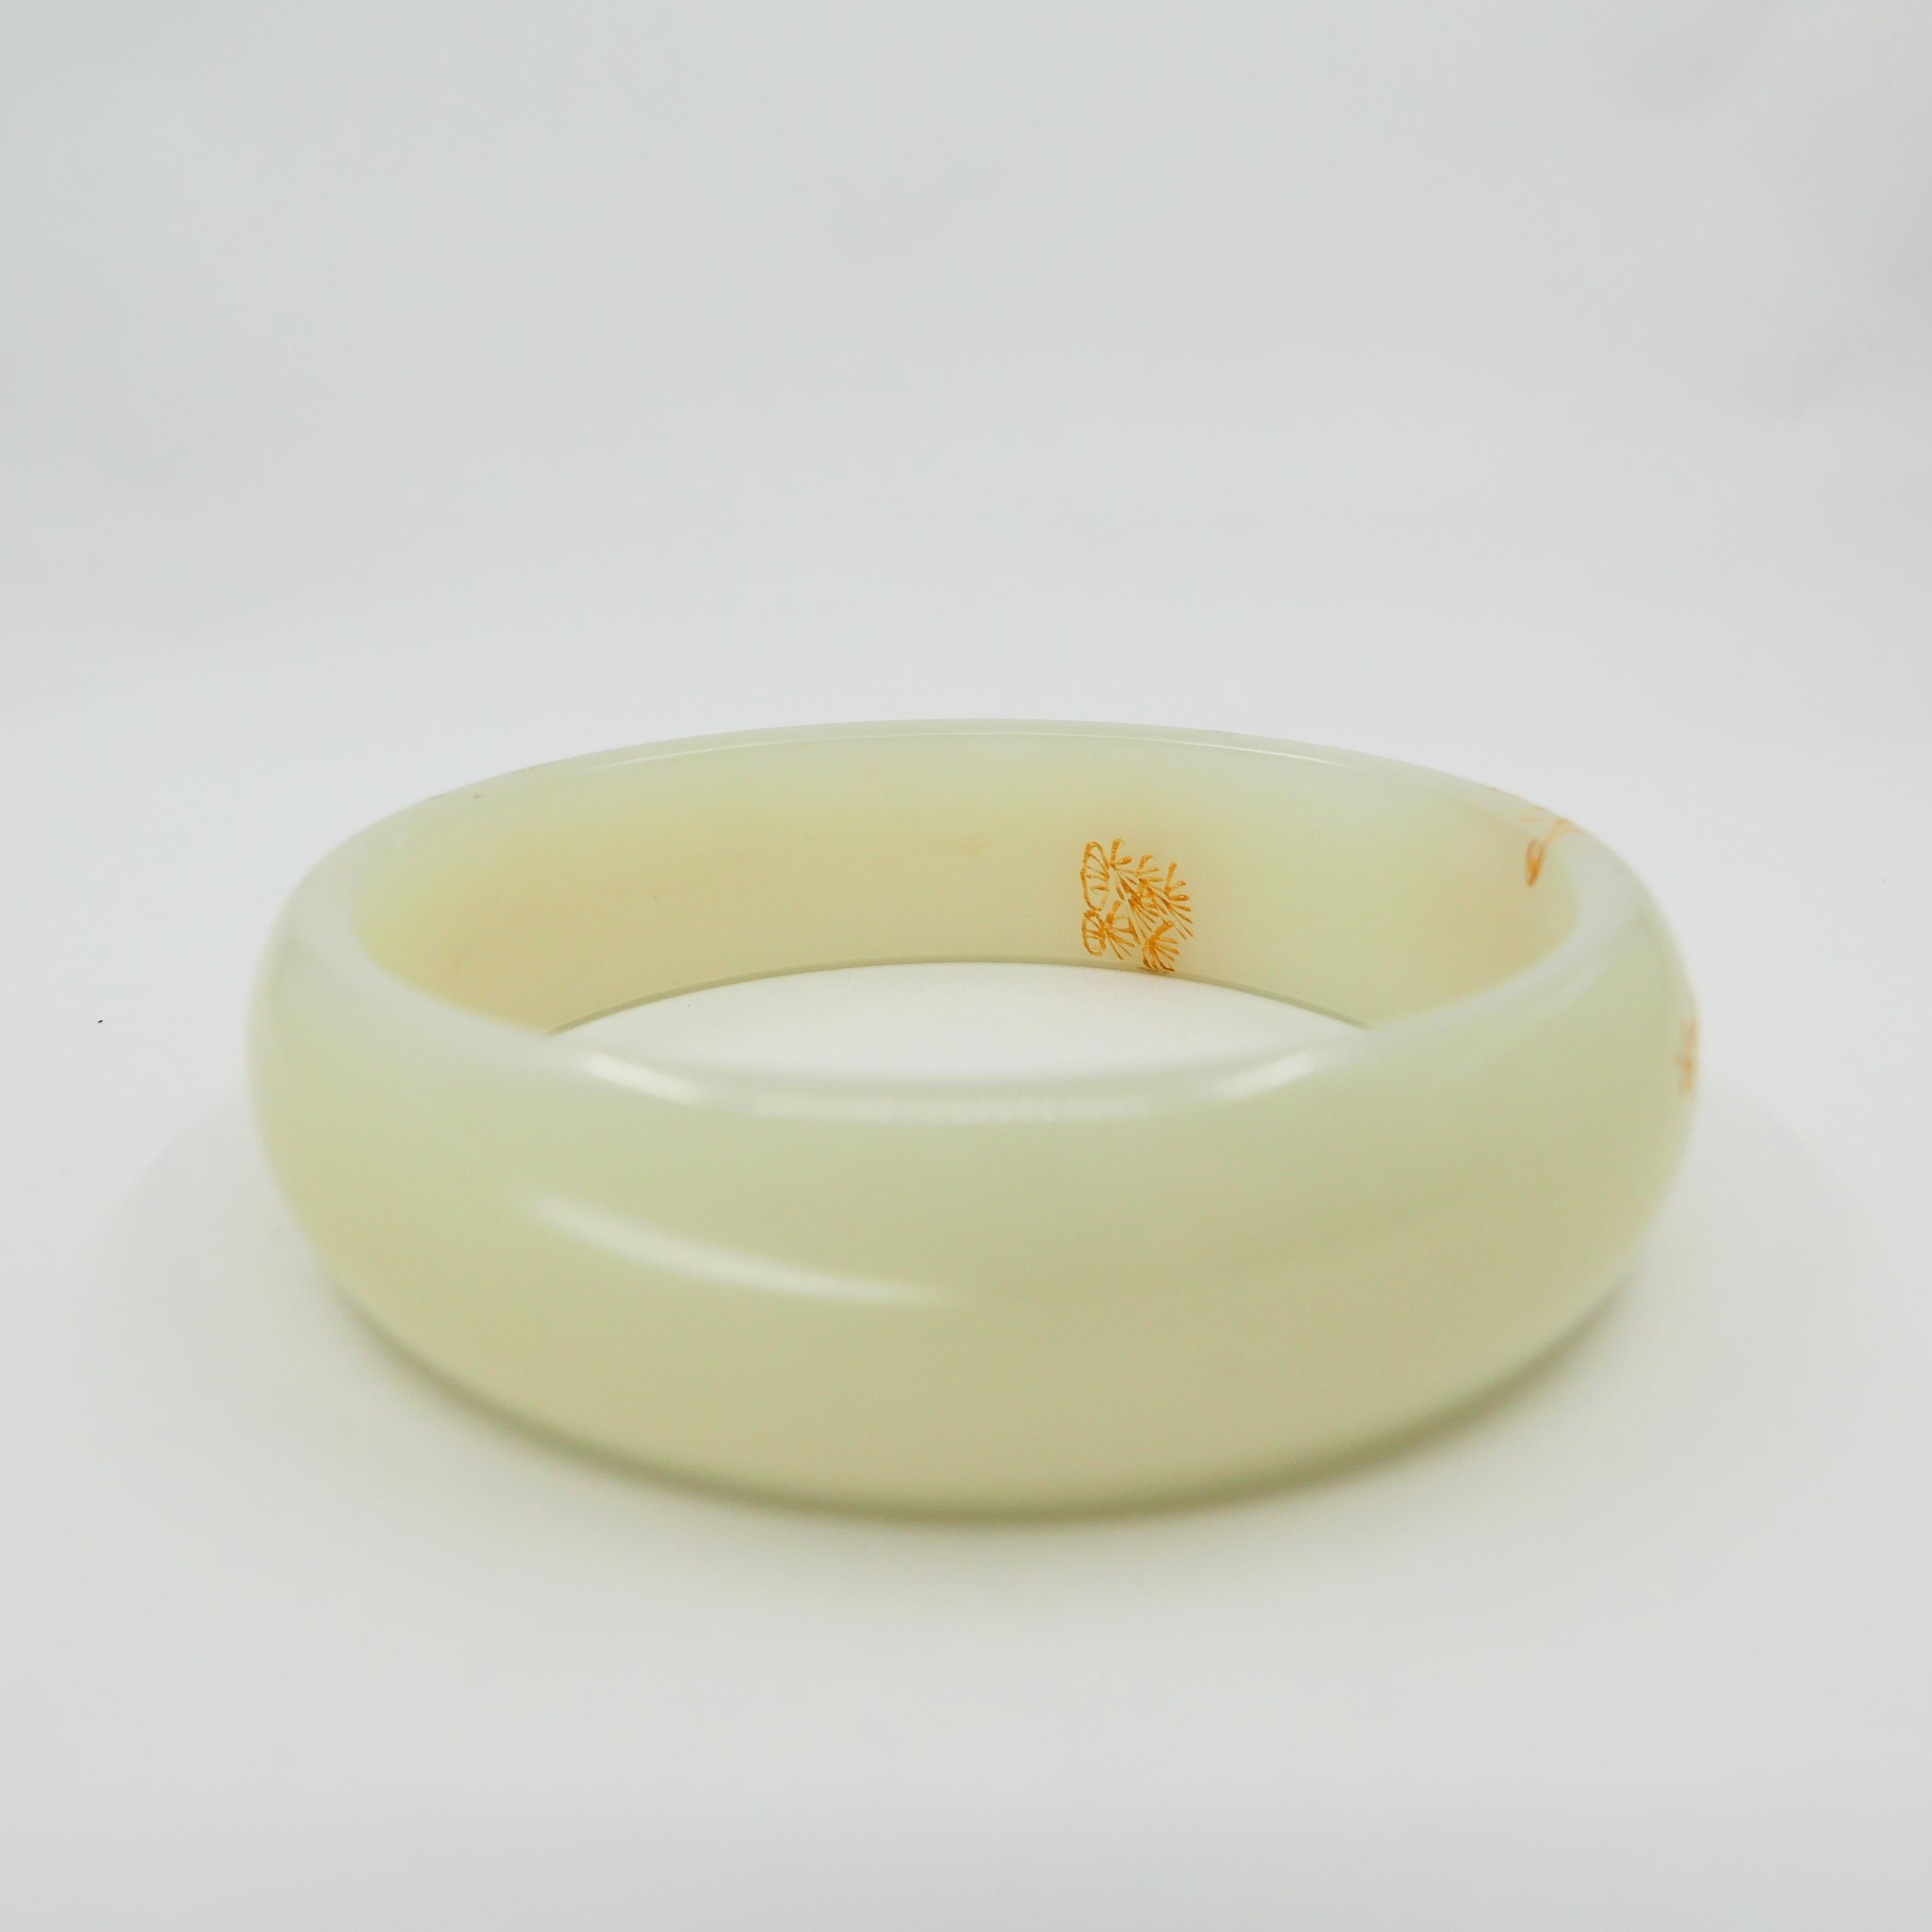 Certified Natural Nephrite White Jade Bangle Floral Gold Inlay, Flower Motif 3